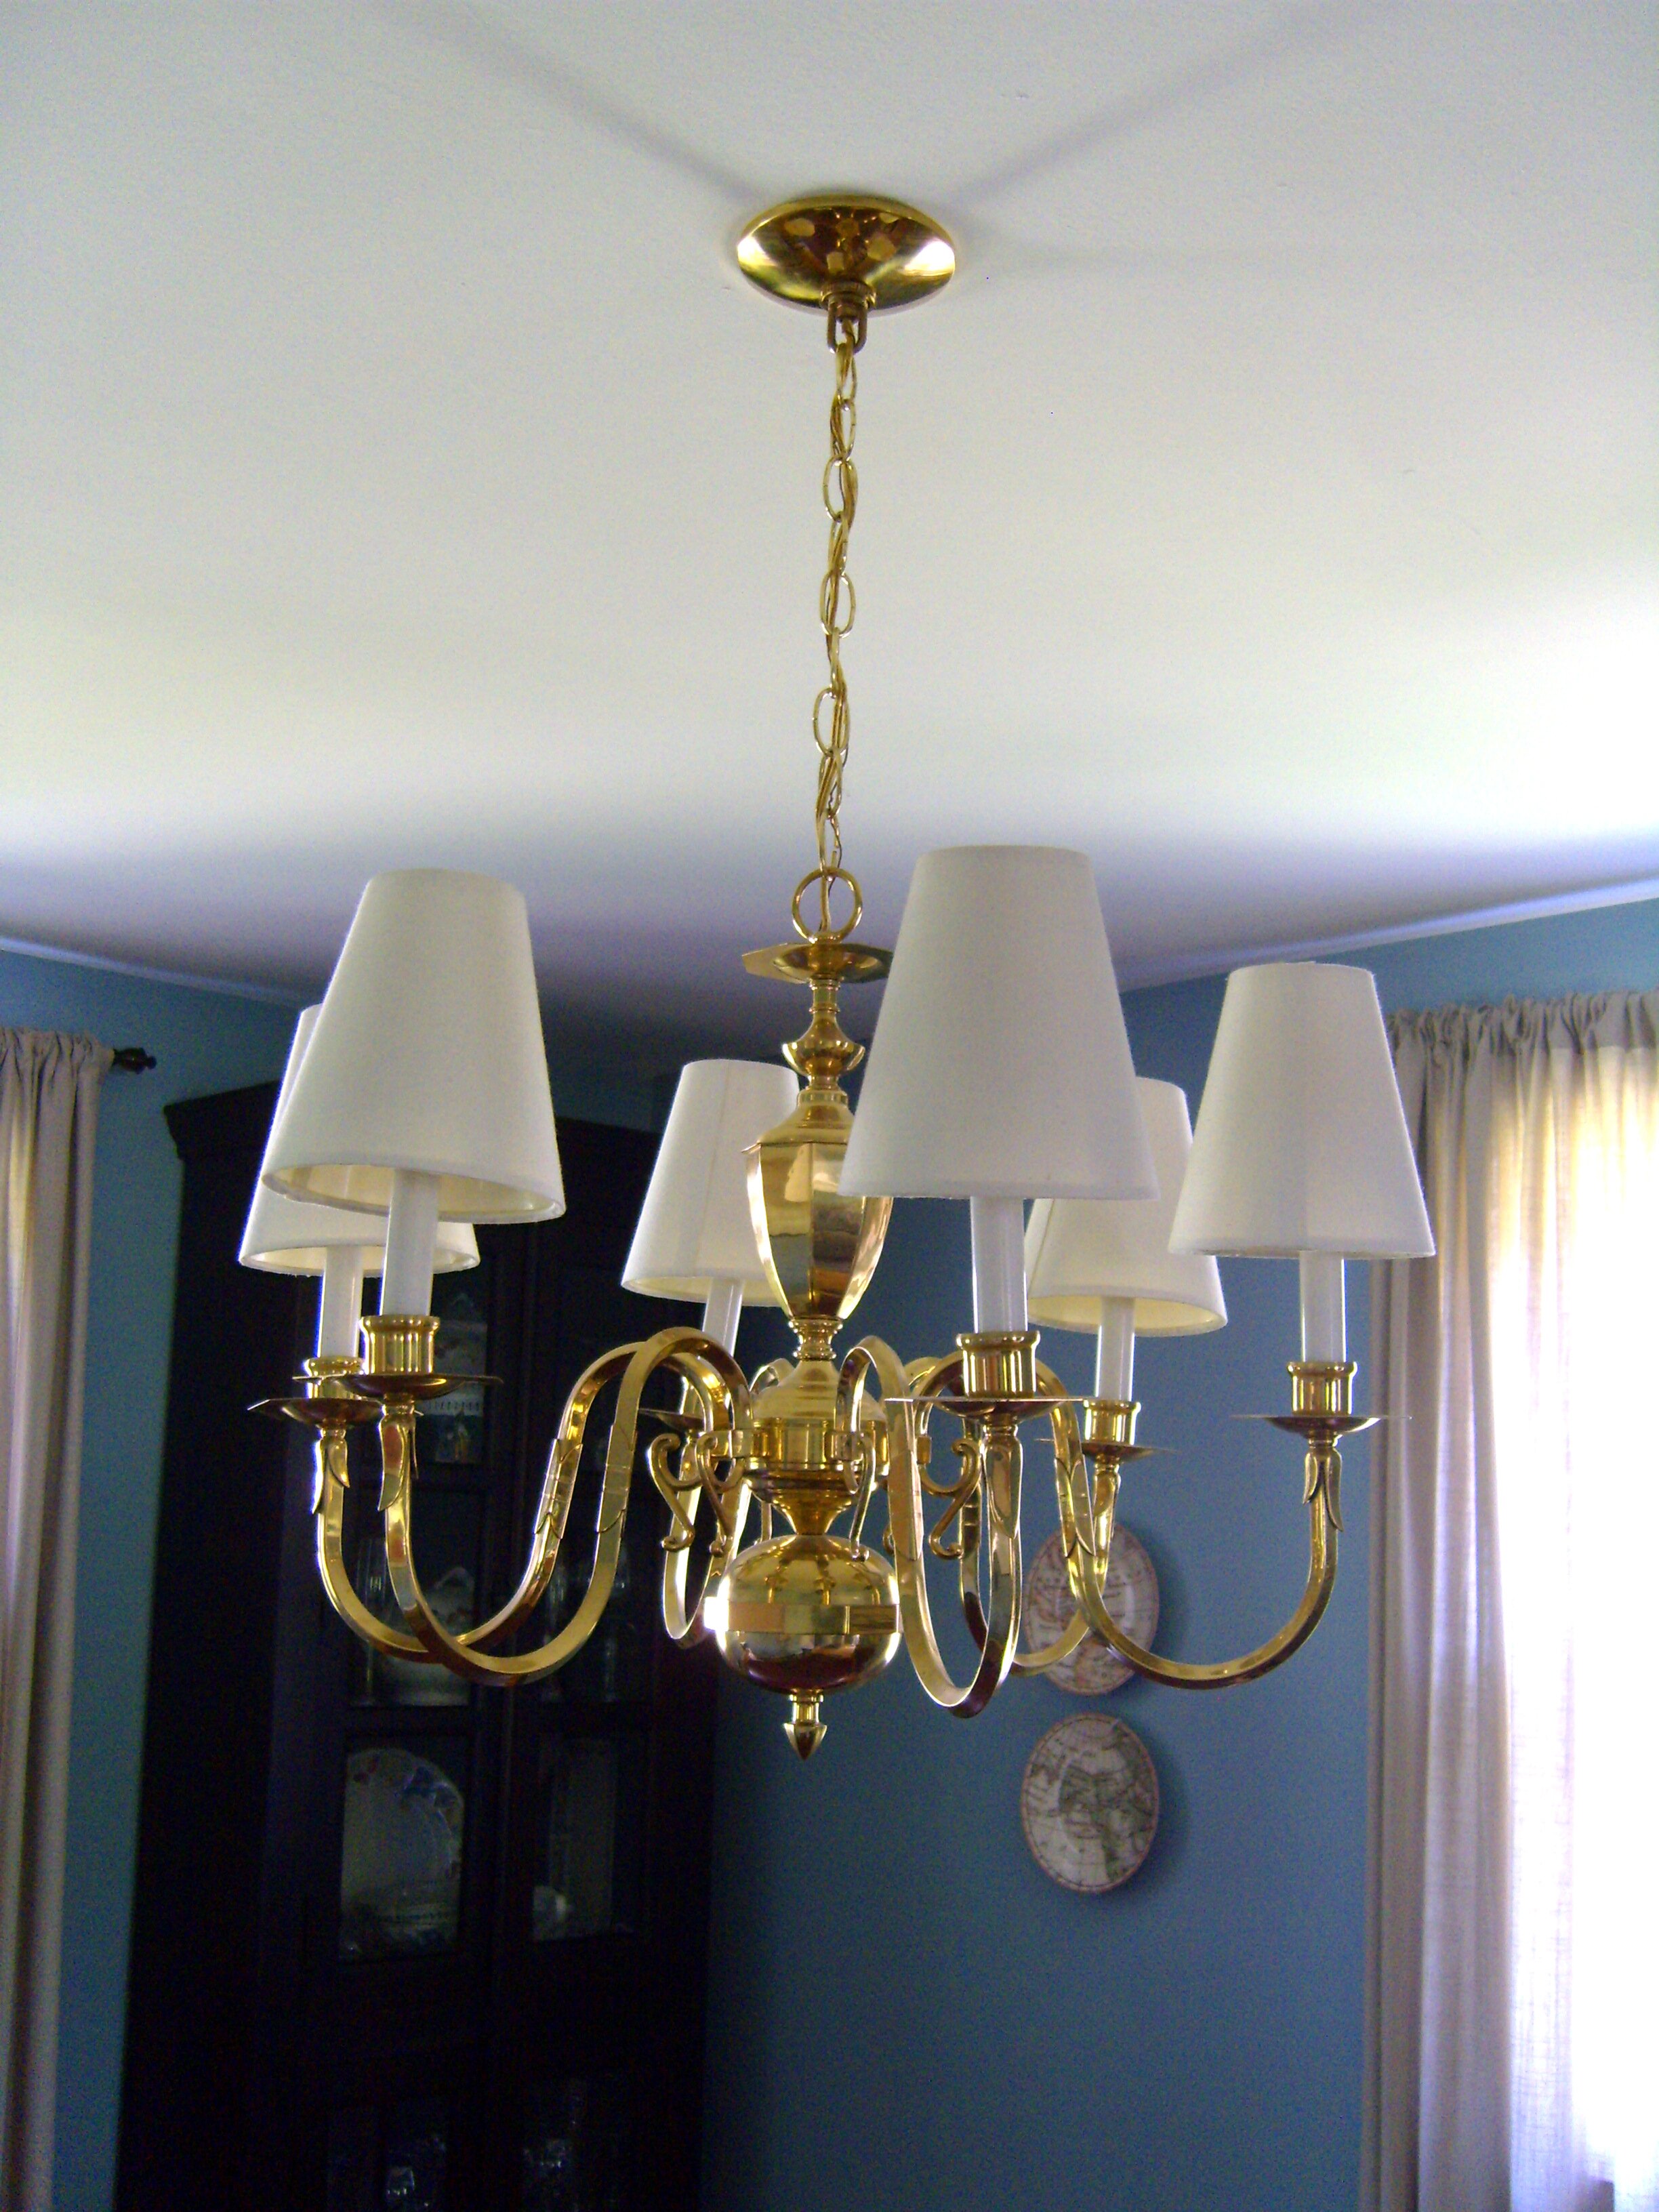 Chandelier Replacement Shades | Glass Globe Replacement Shades | Glass Chandelier Shades